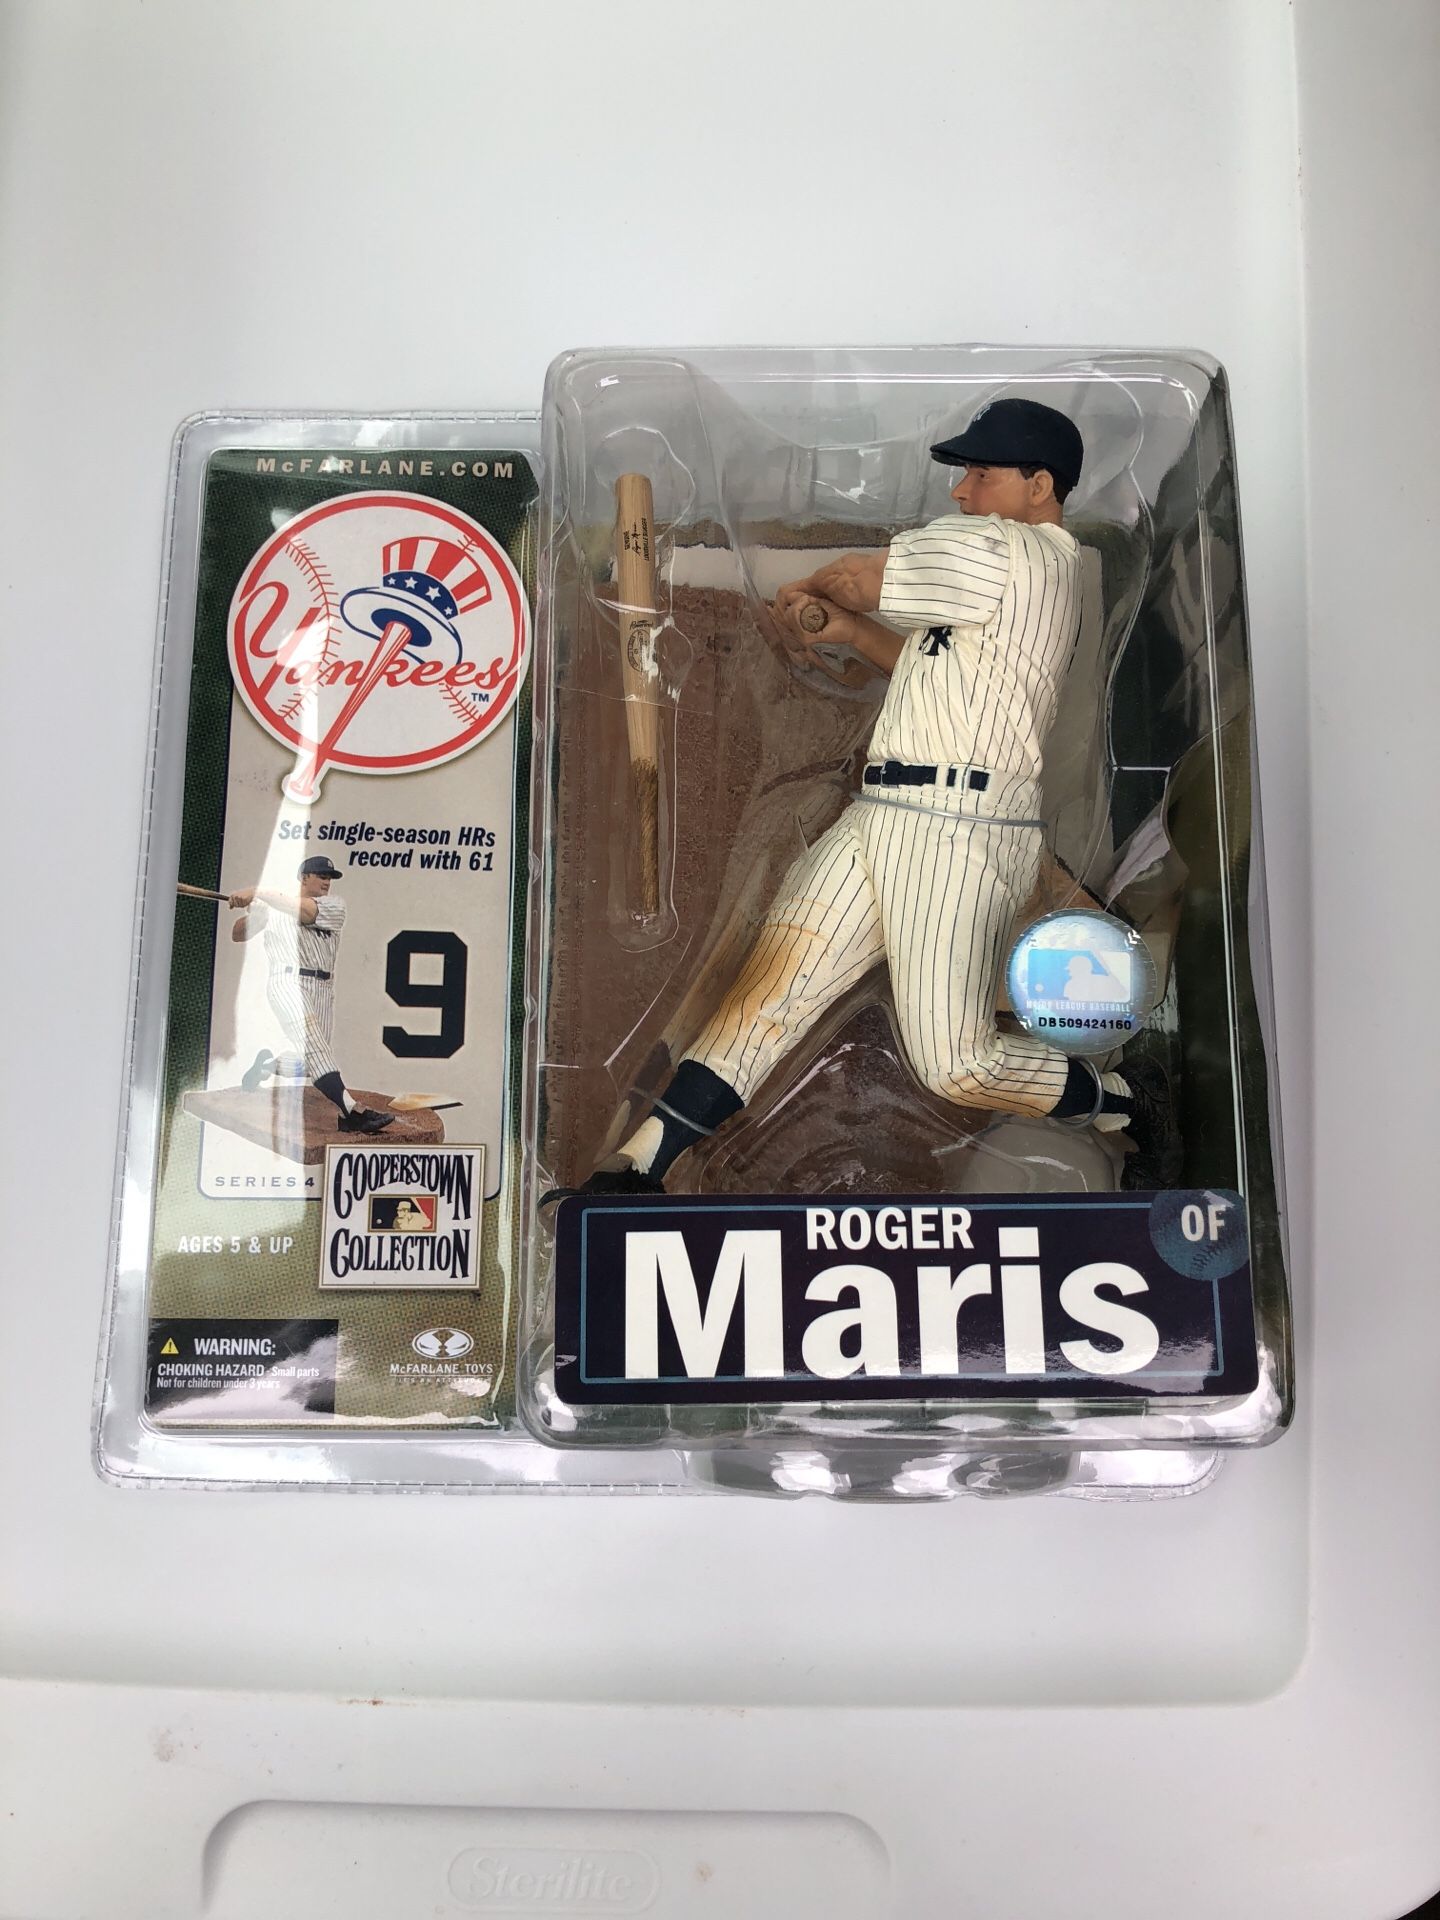 Roger Maris, NY Yankee Cooperstown Collection McFarlane Figurine